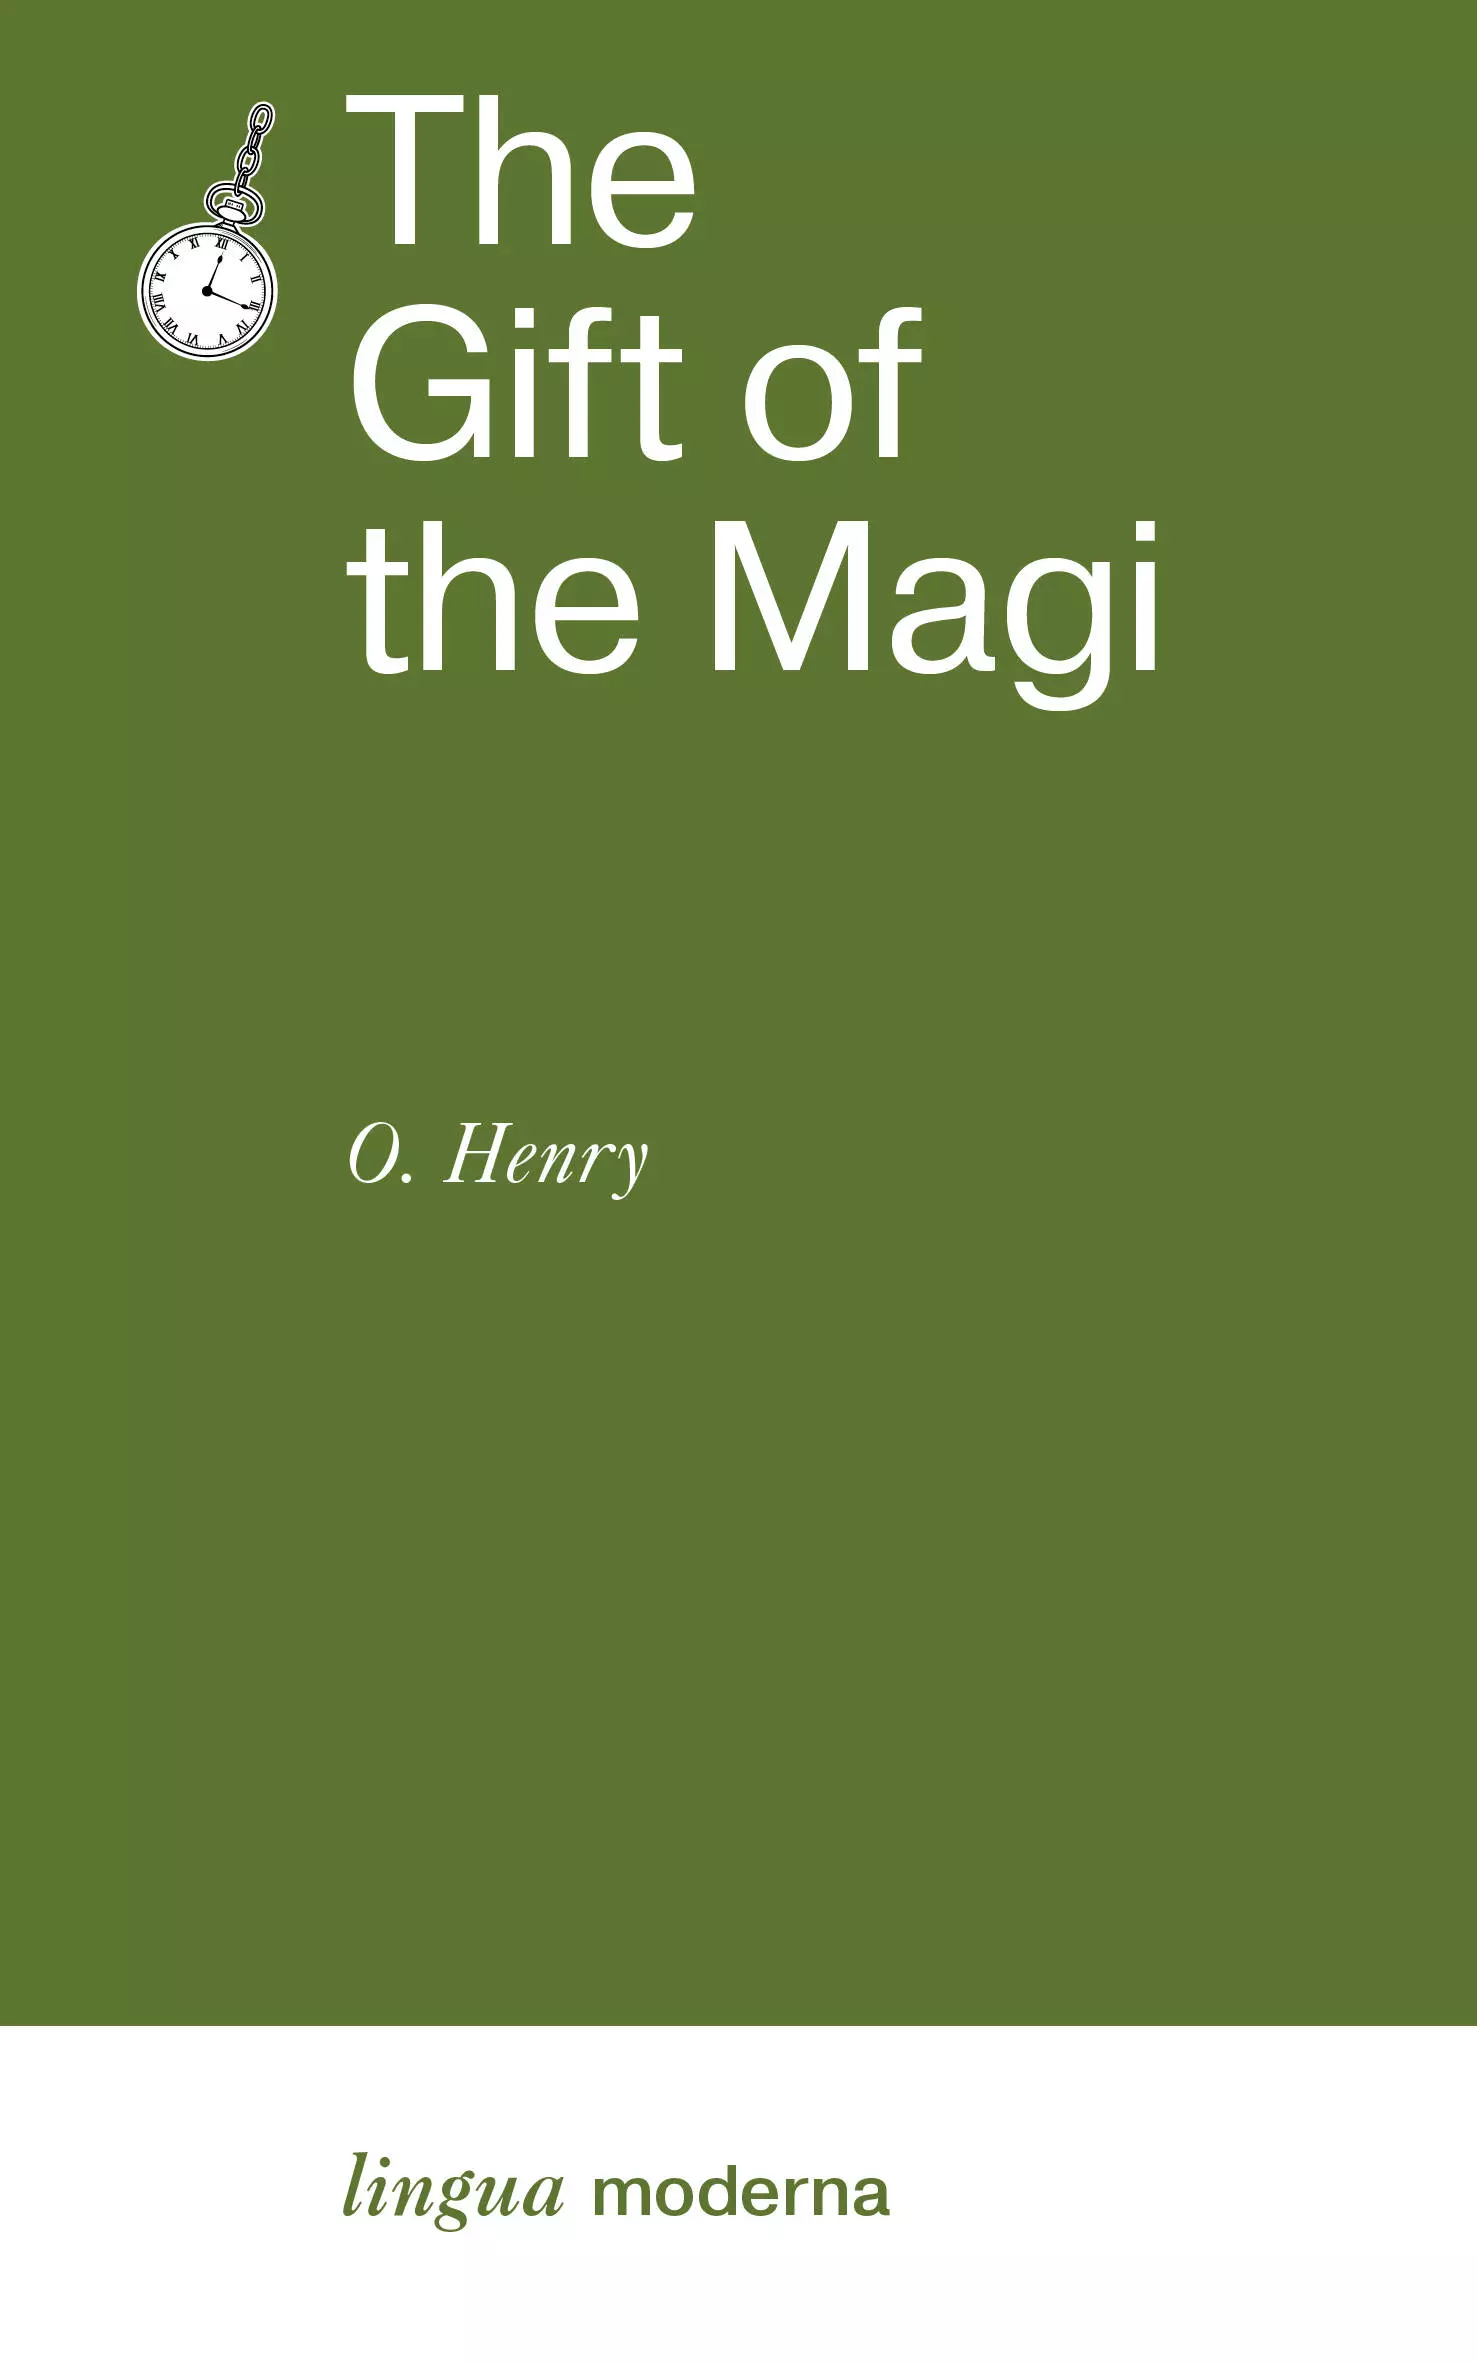 The Gift of the Magi генри о o henry уильям сидни collected tales v сборник рассказов v на английском языке